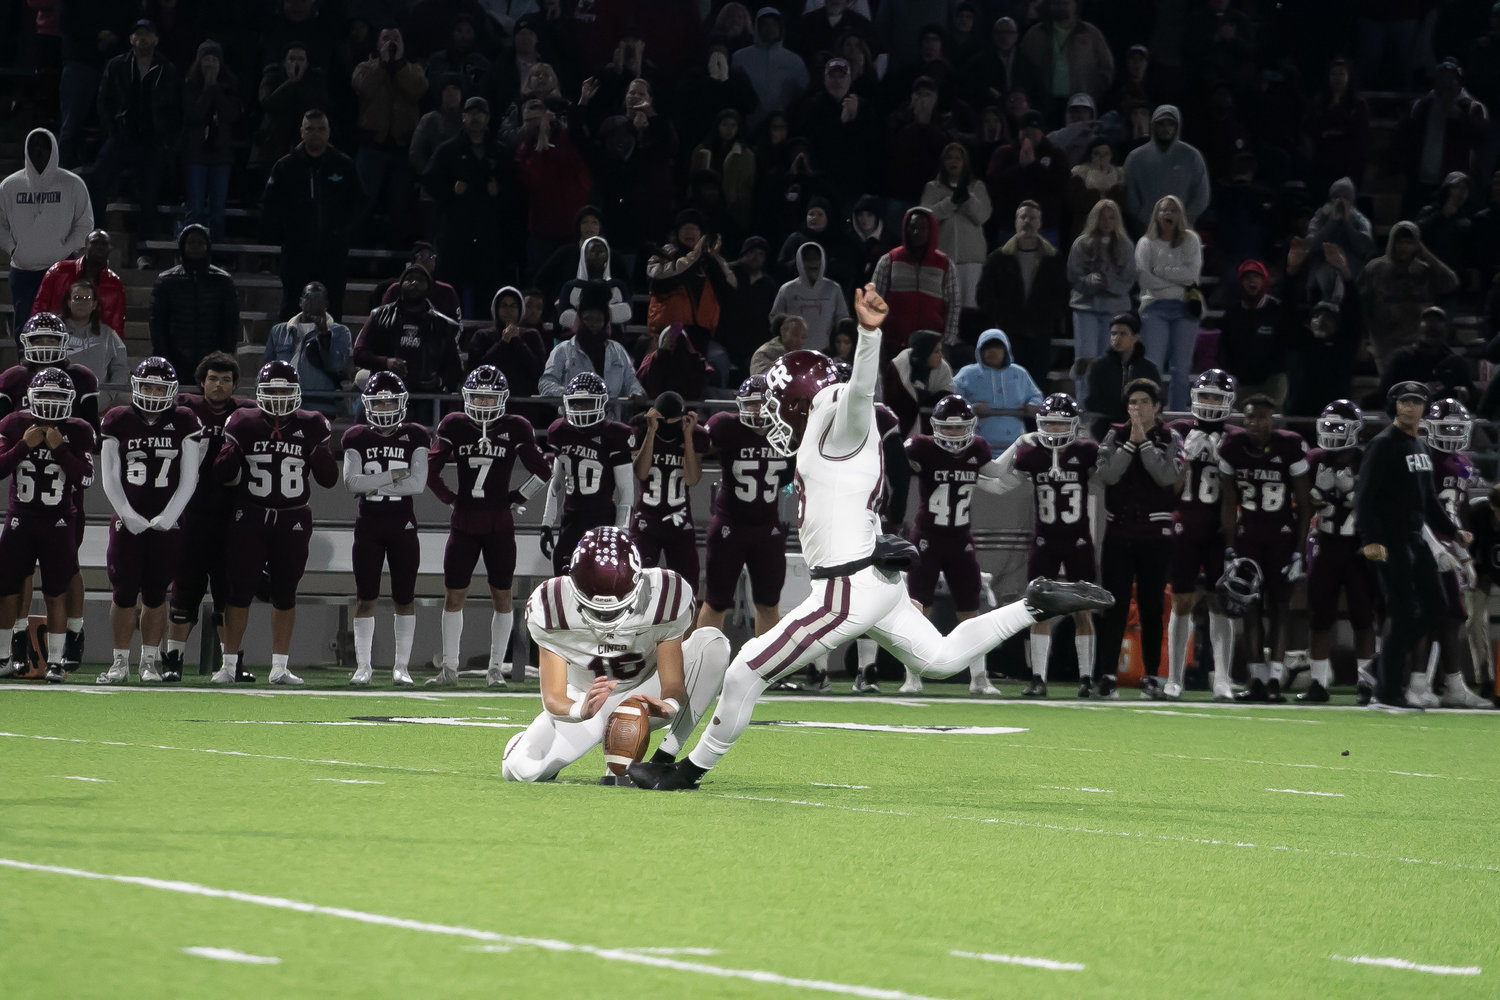 Santiago Taborda kicks a game winning field goal during Friday's Class 6A-Division I area round game between Cinco Ranch and Cy-Fair at Pridgeon Stadium.